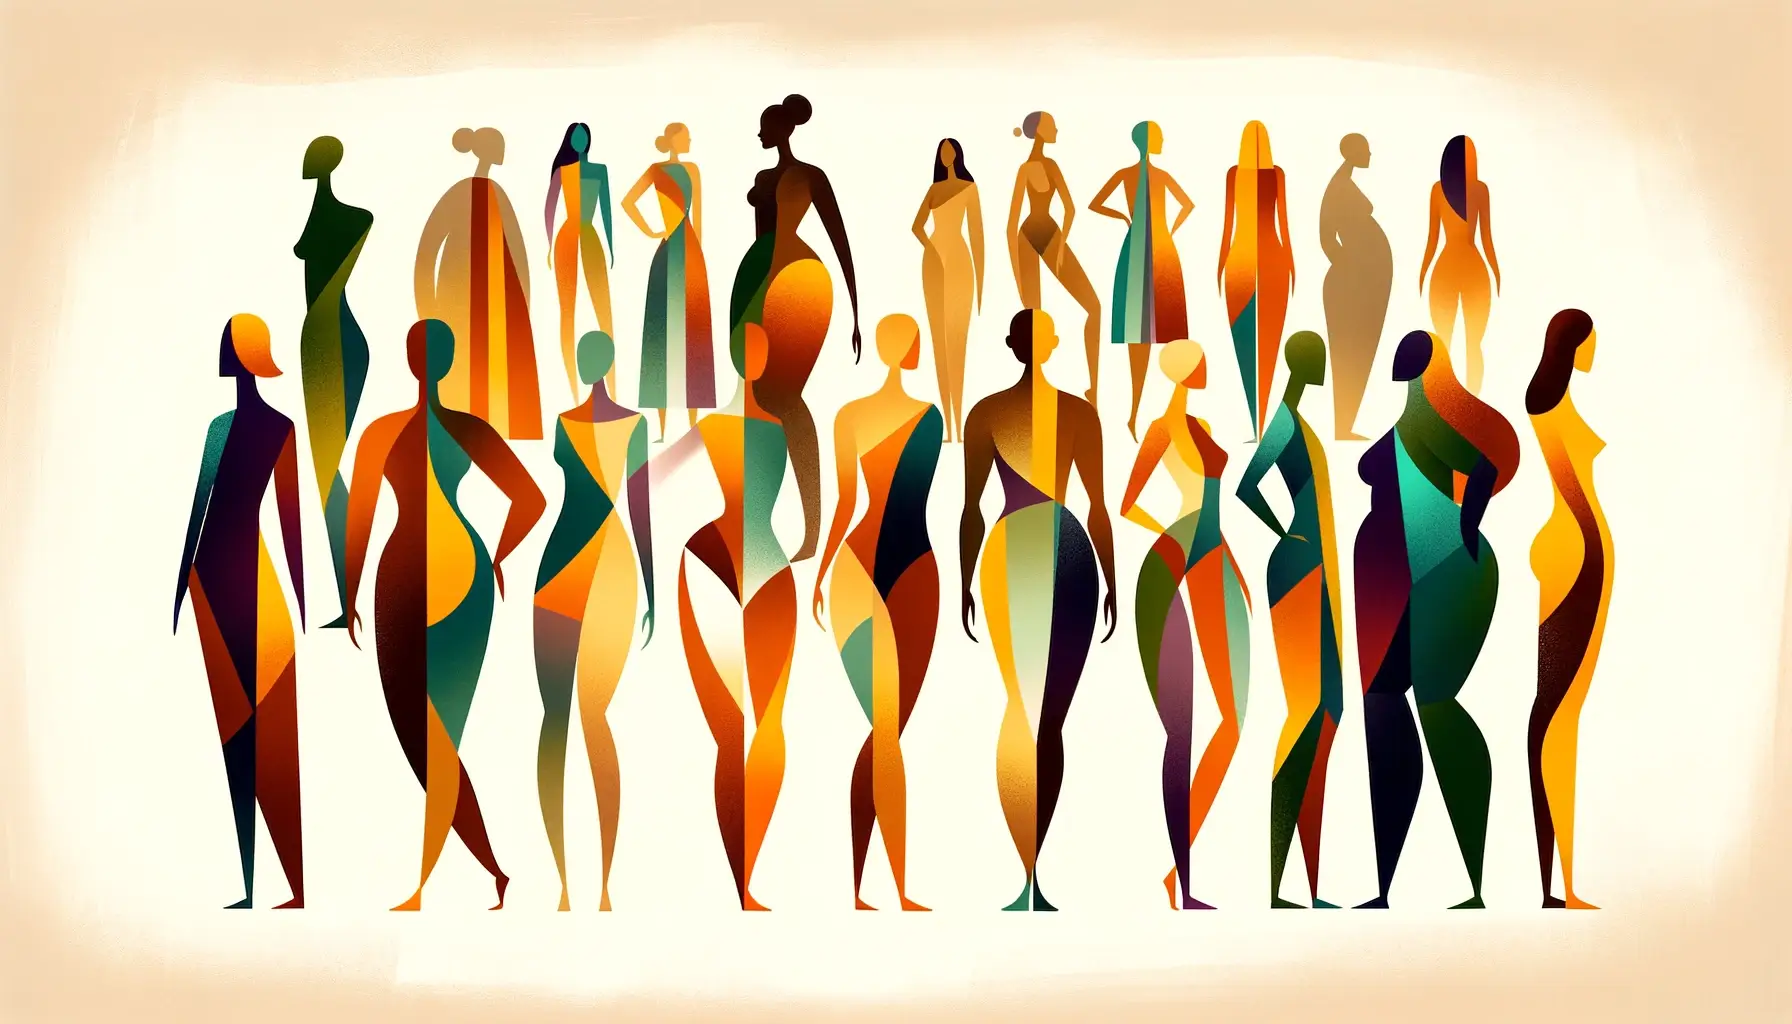 Illustration of diverse human body shapes, including apple, pear, hourglass, rectangle, and inverted triangle, standing side by side.